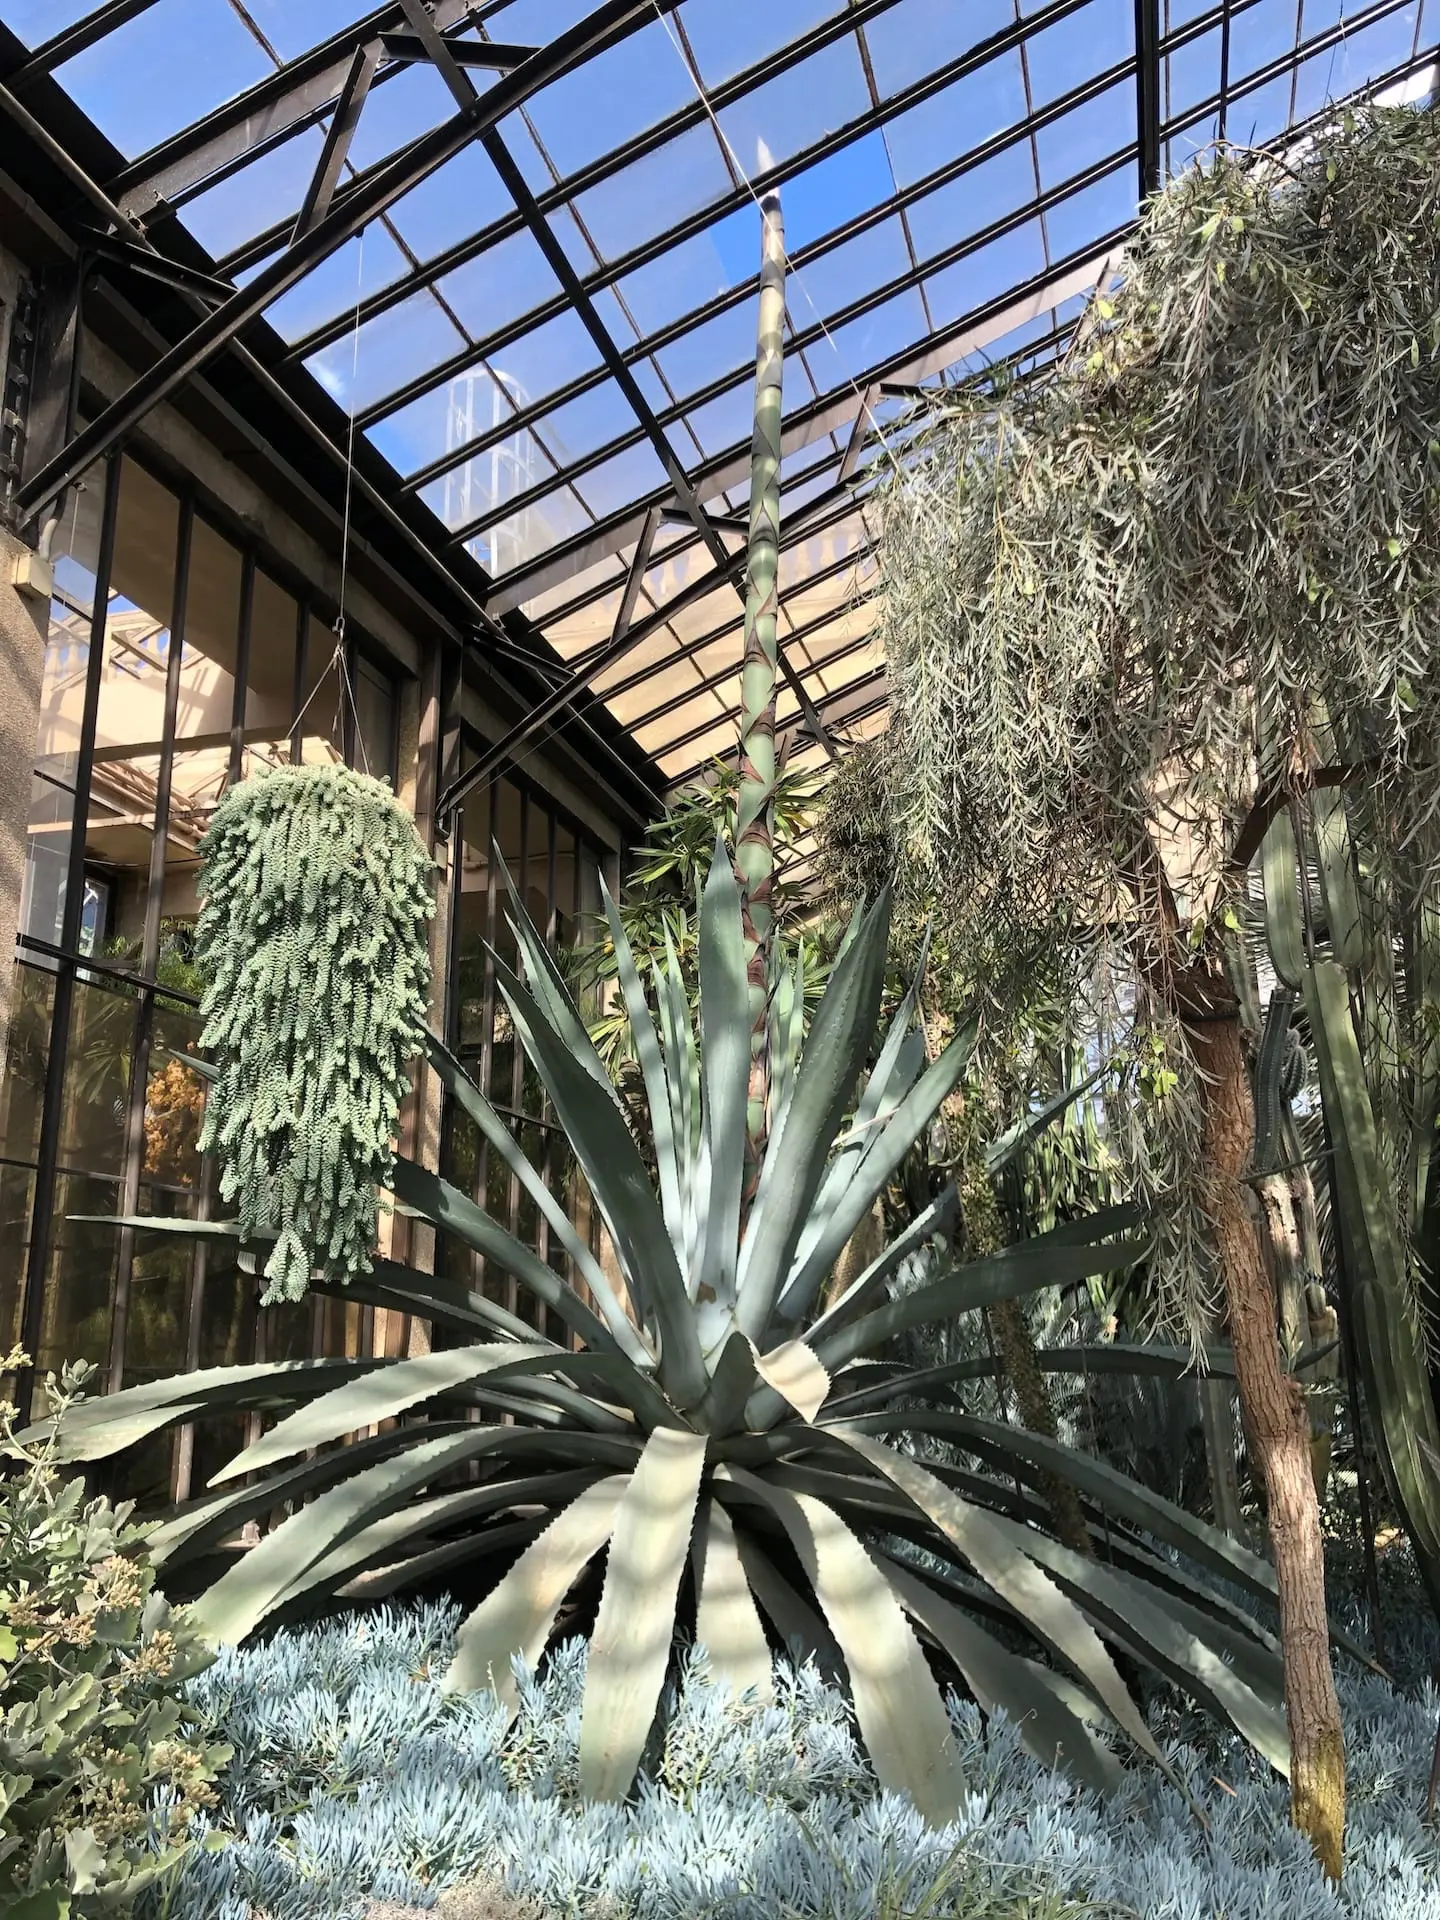 The century agave is in Longwood's Silver Garden, which showcases plants with that color. Courtesy of Longwood Gardens.